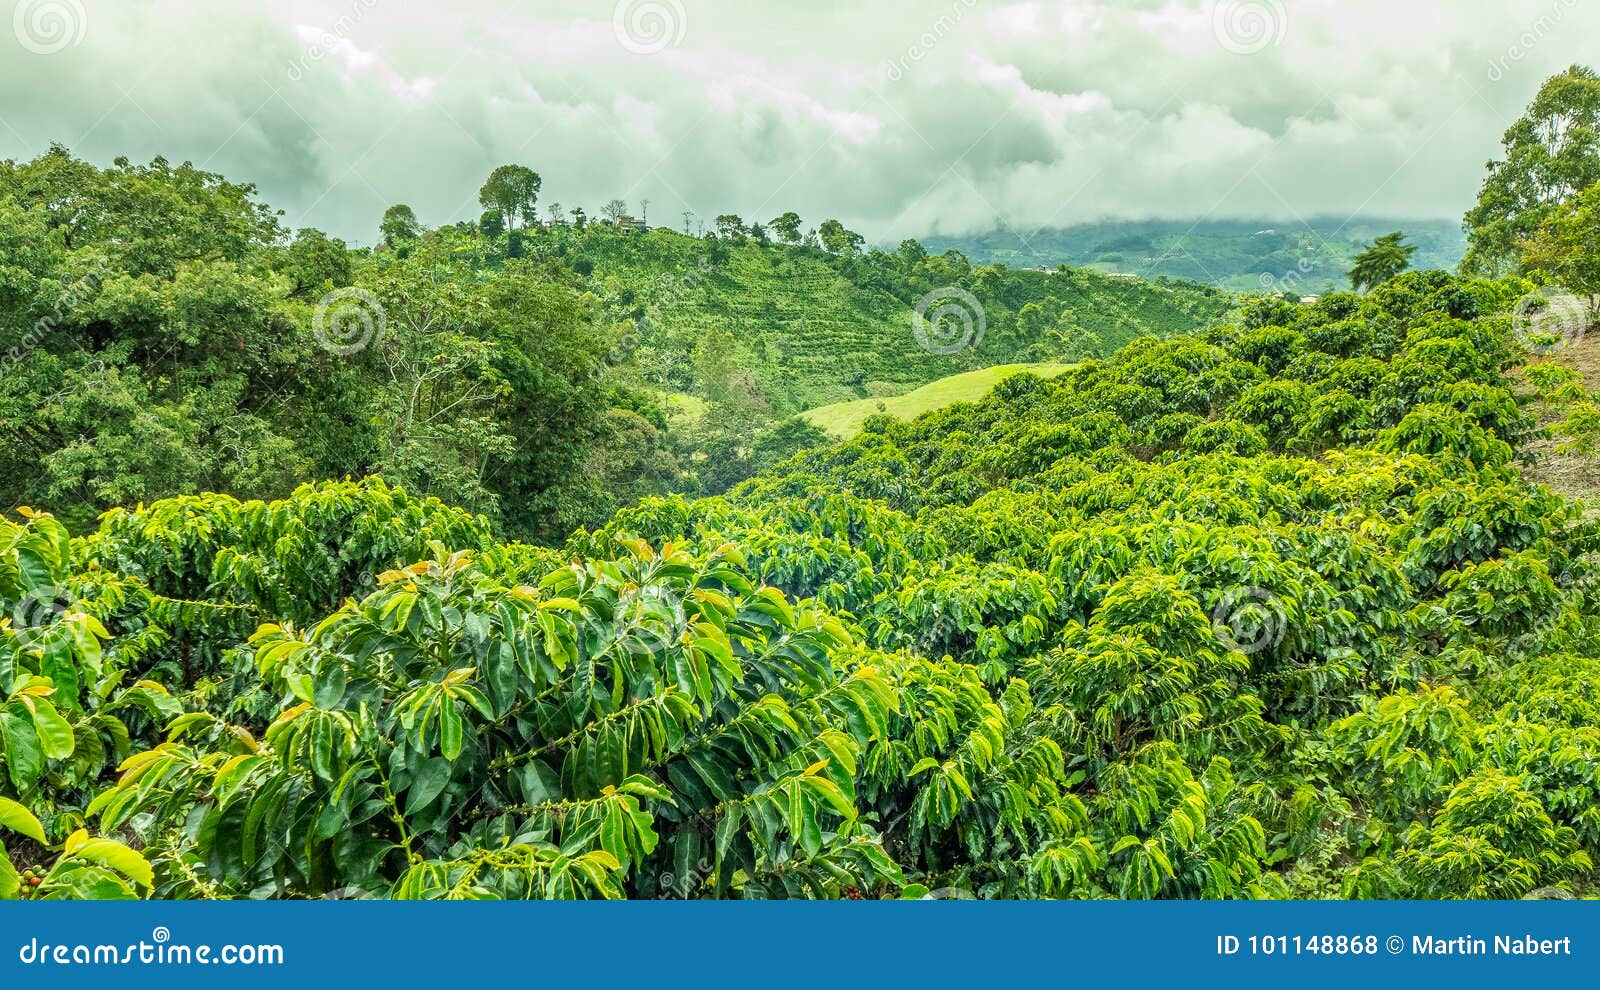 coffee plantation in jerico, colombia